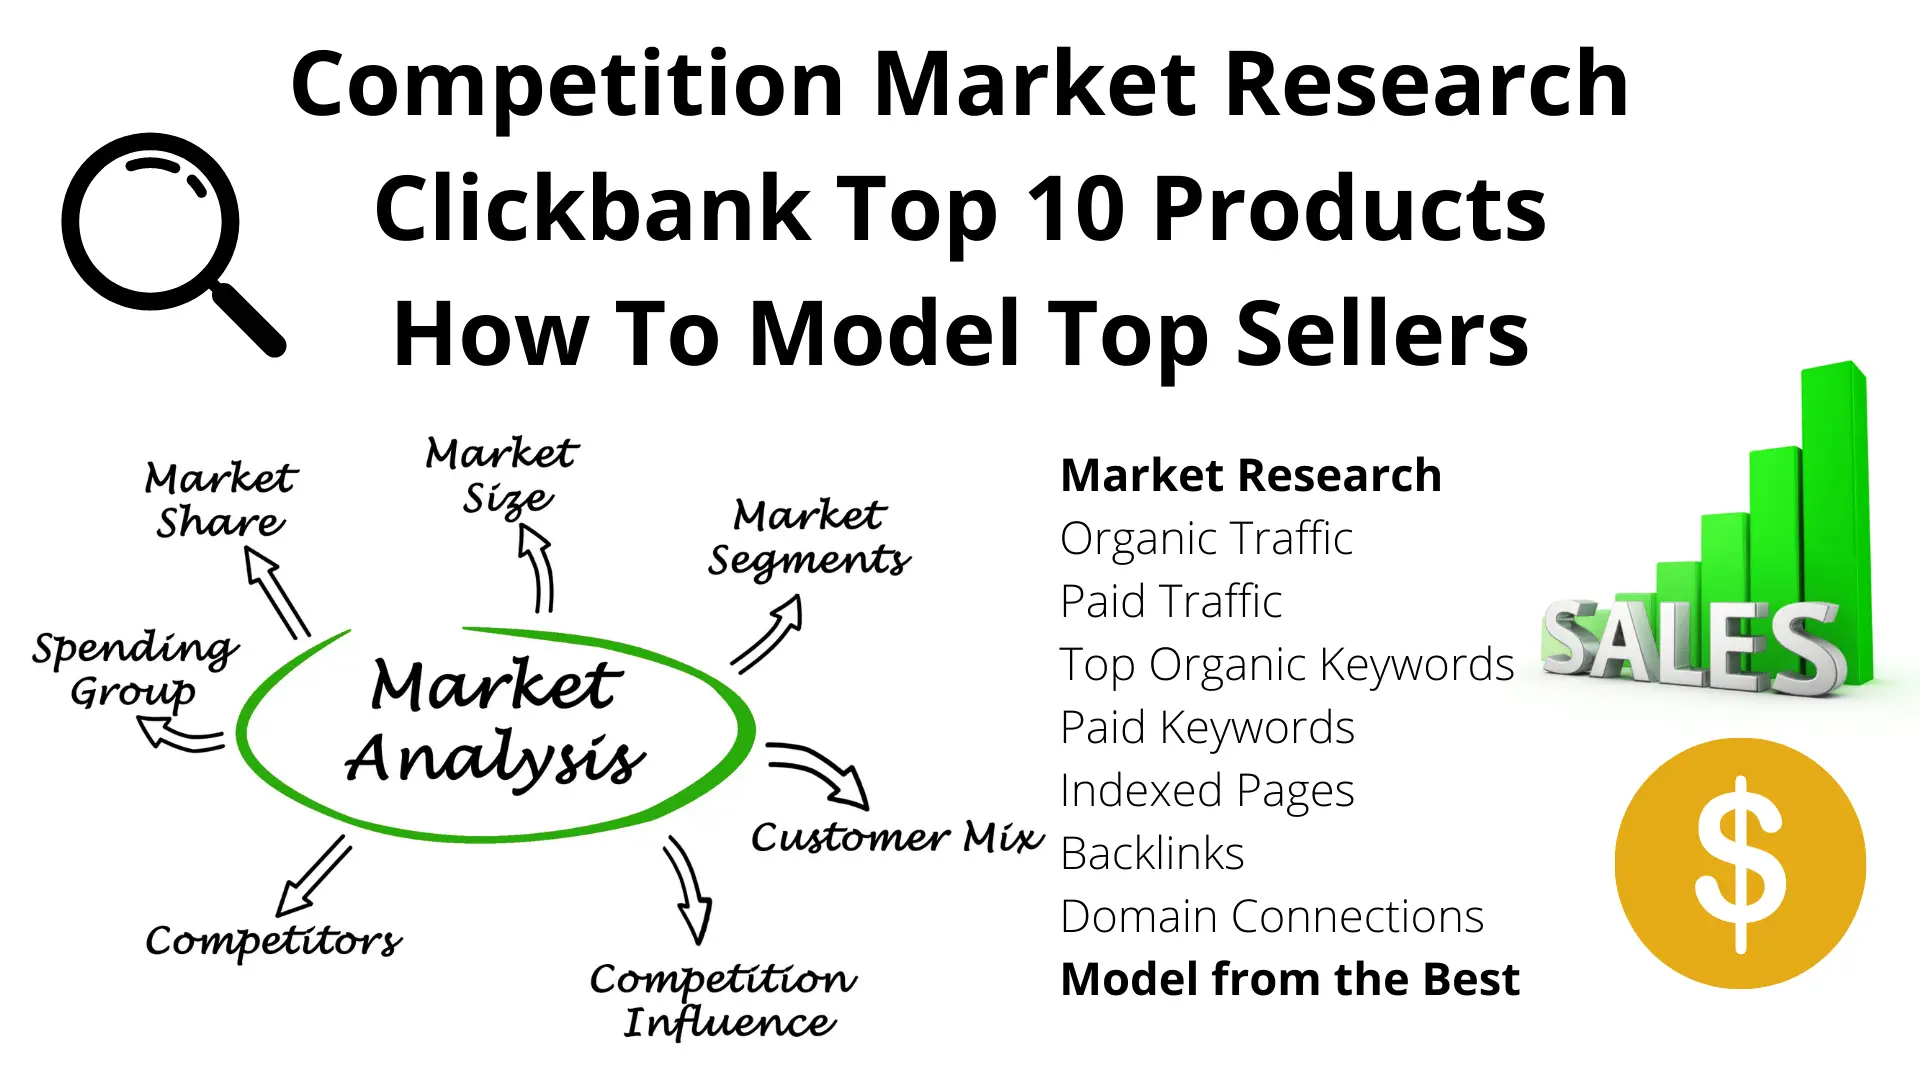 Competition market research of Clickbank top 10 products. How to model top sellers.